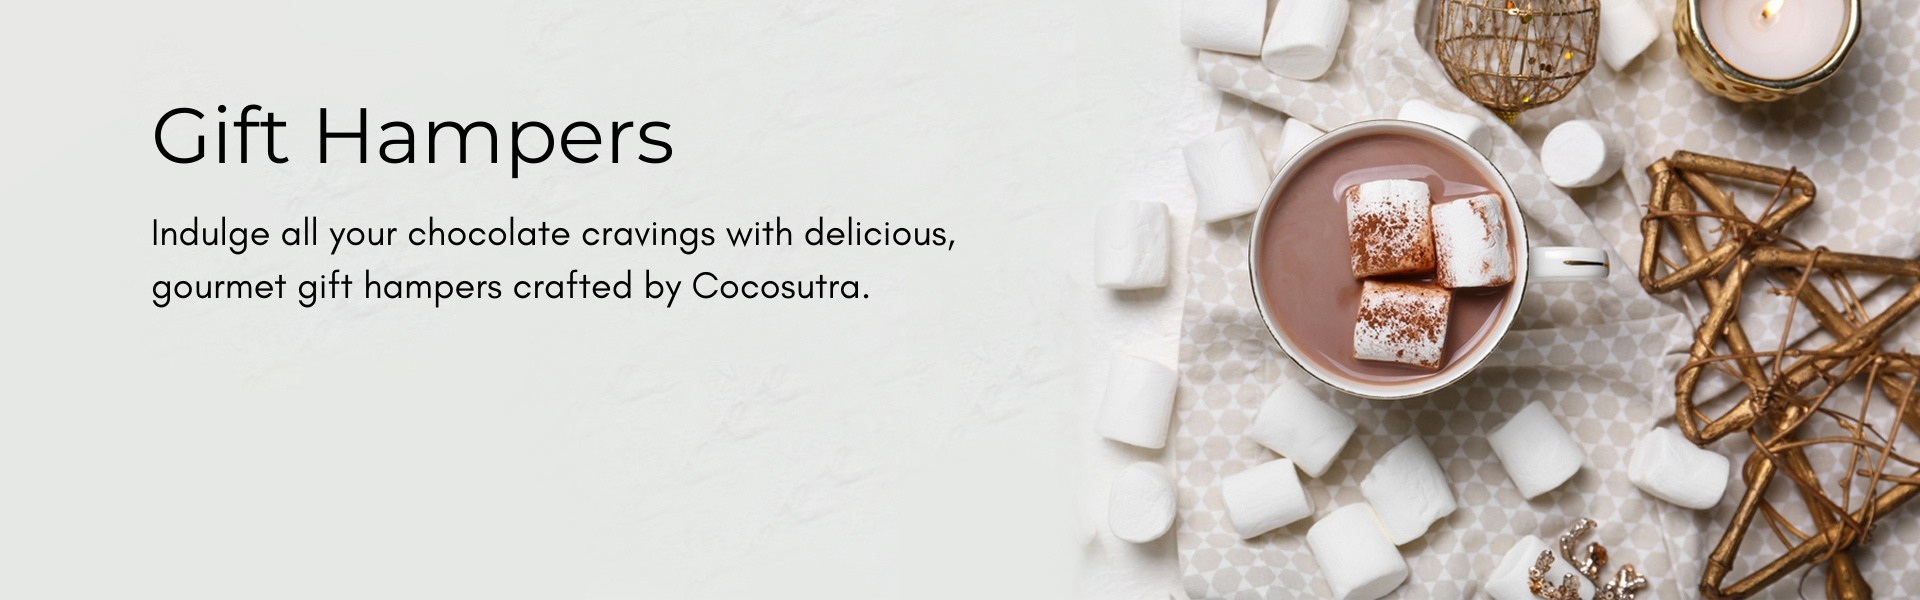 Cocosutra - Gift Hampers